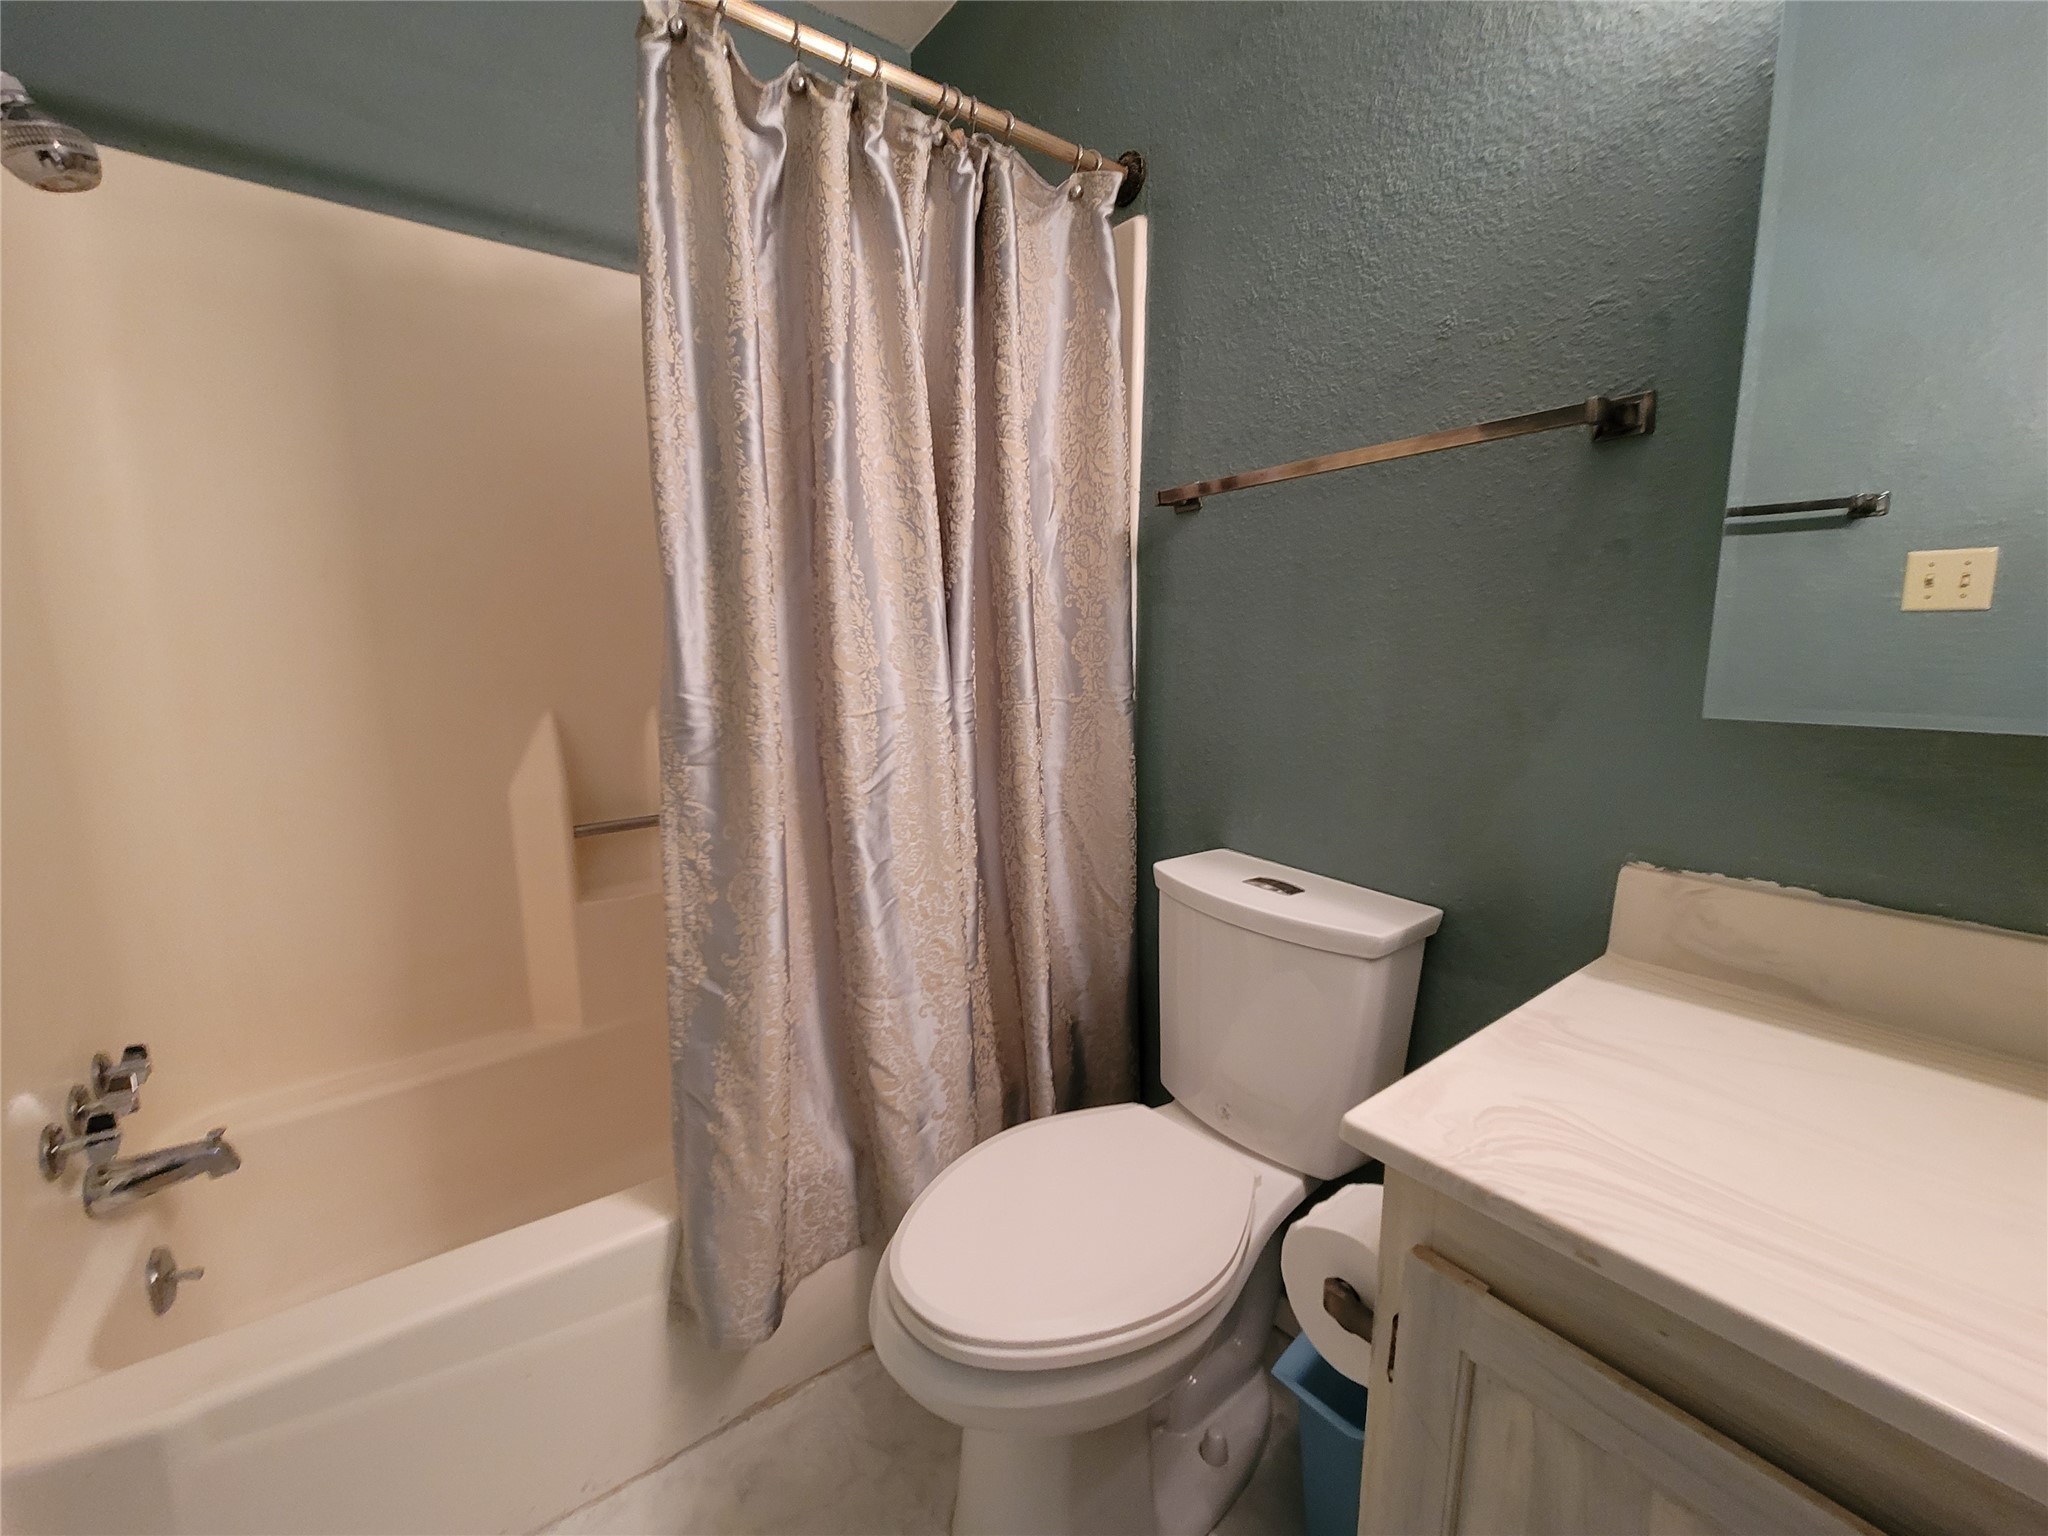 3055 Trinity Dr. Drive 614, Los Alamos, New Mexico 87544, 1 Bedroom Bedrooms, ,1 BathroomBathrooms,Residential,For Sale,3055 Trinity Dr. Drive 614,202233174